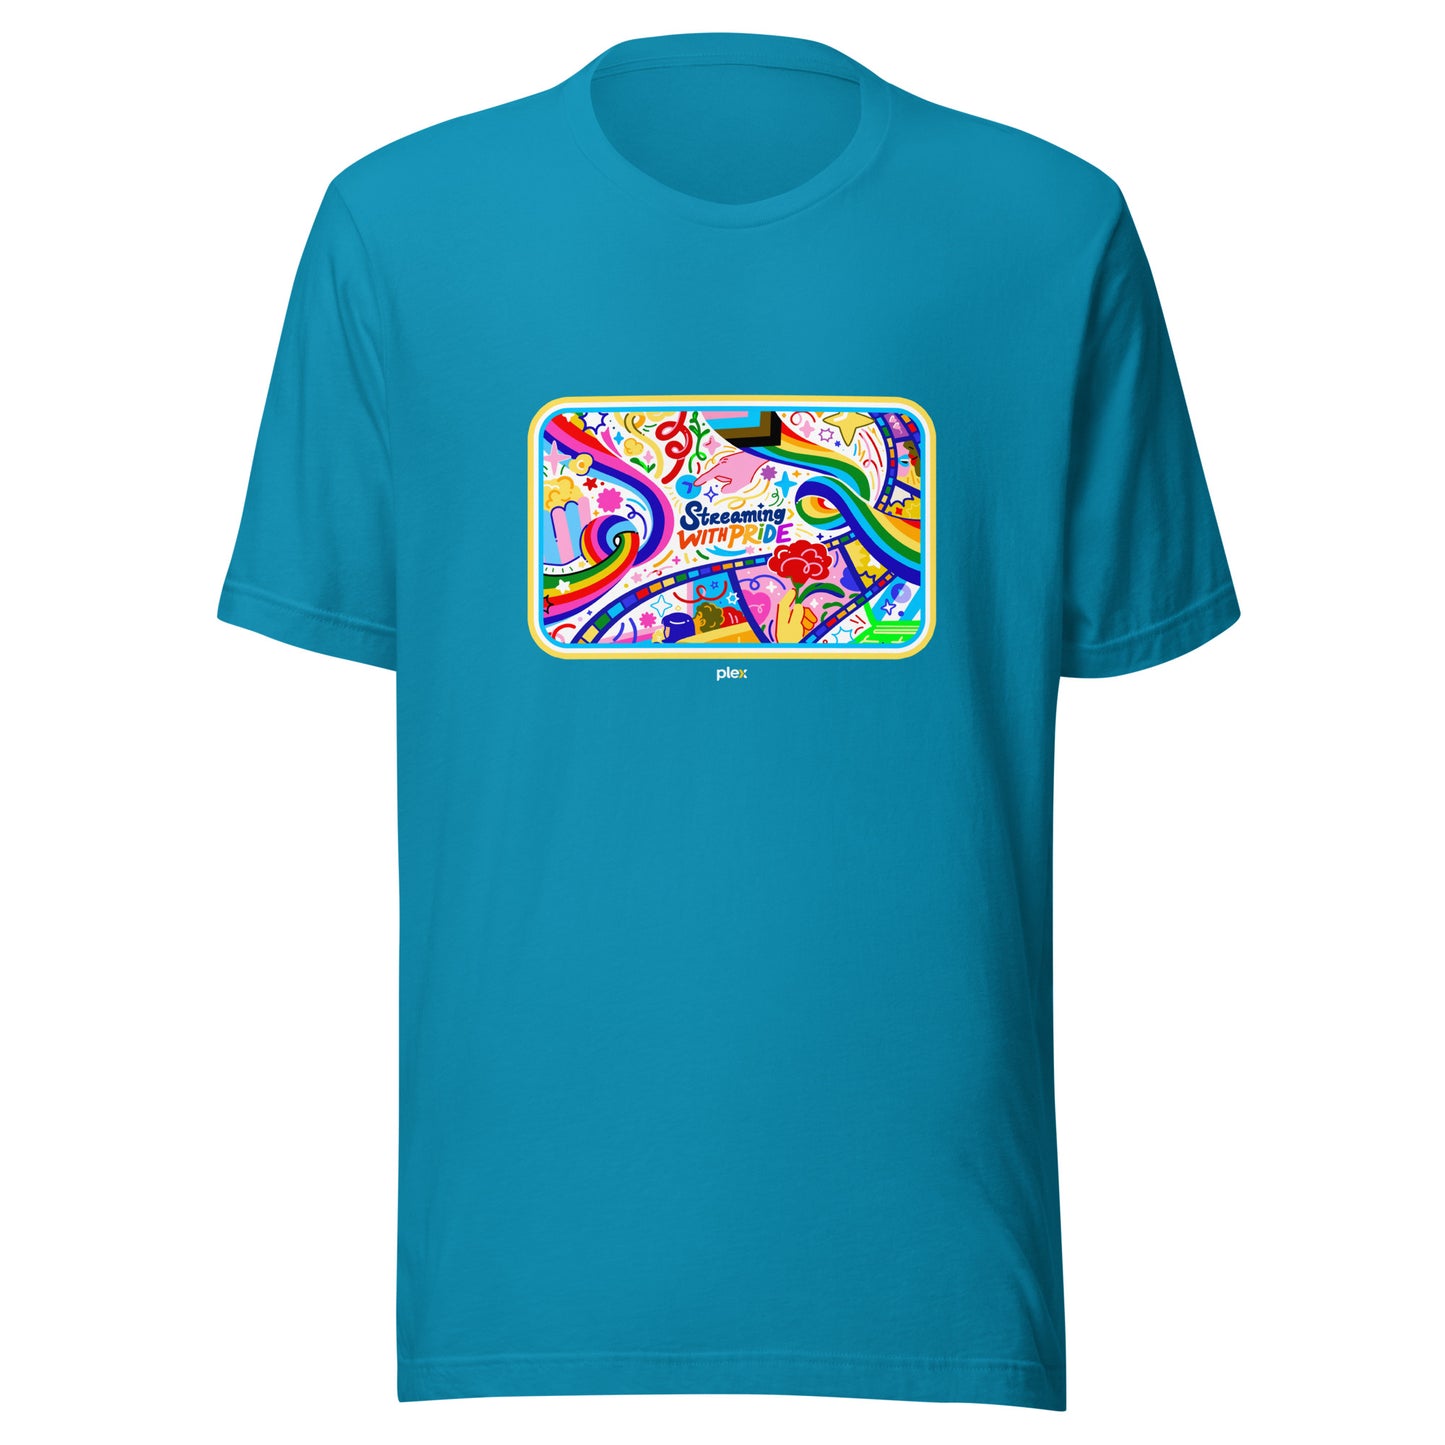 Streaming with Pride T-Shirt